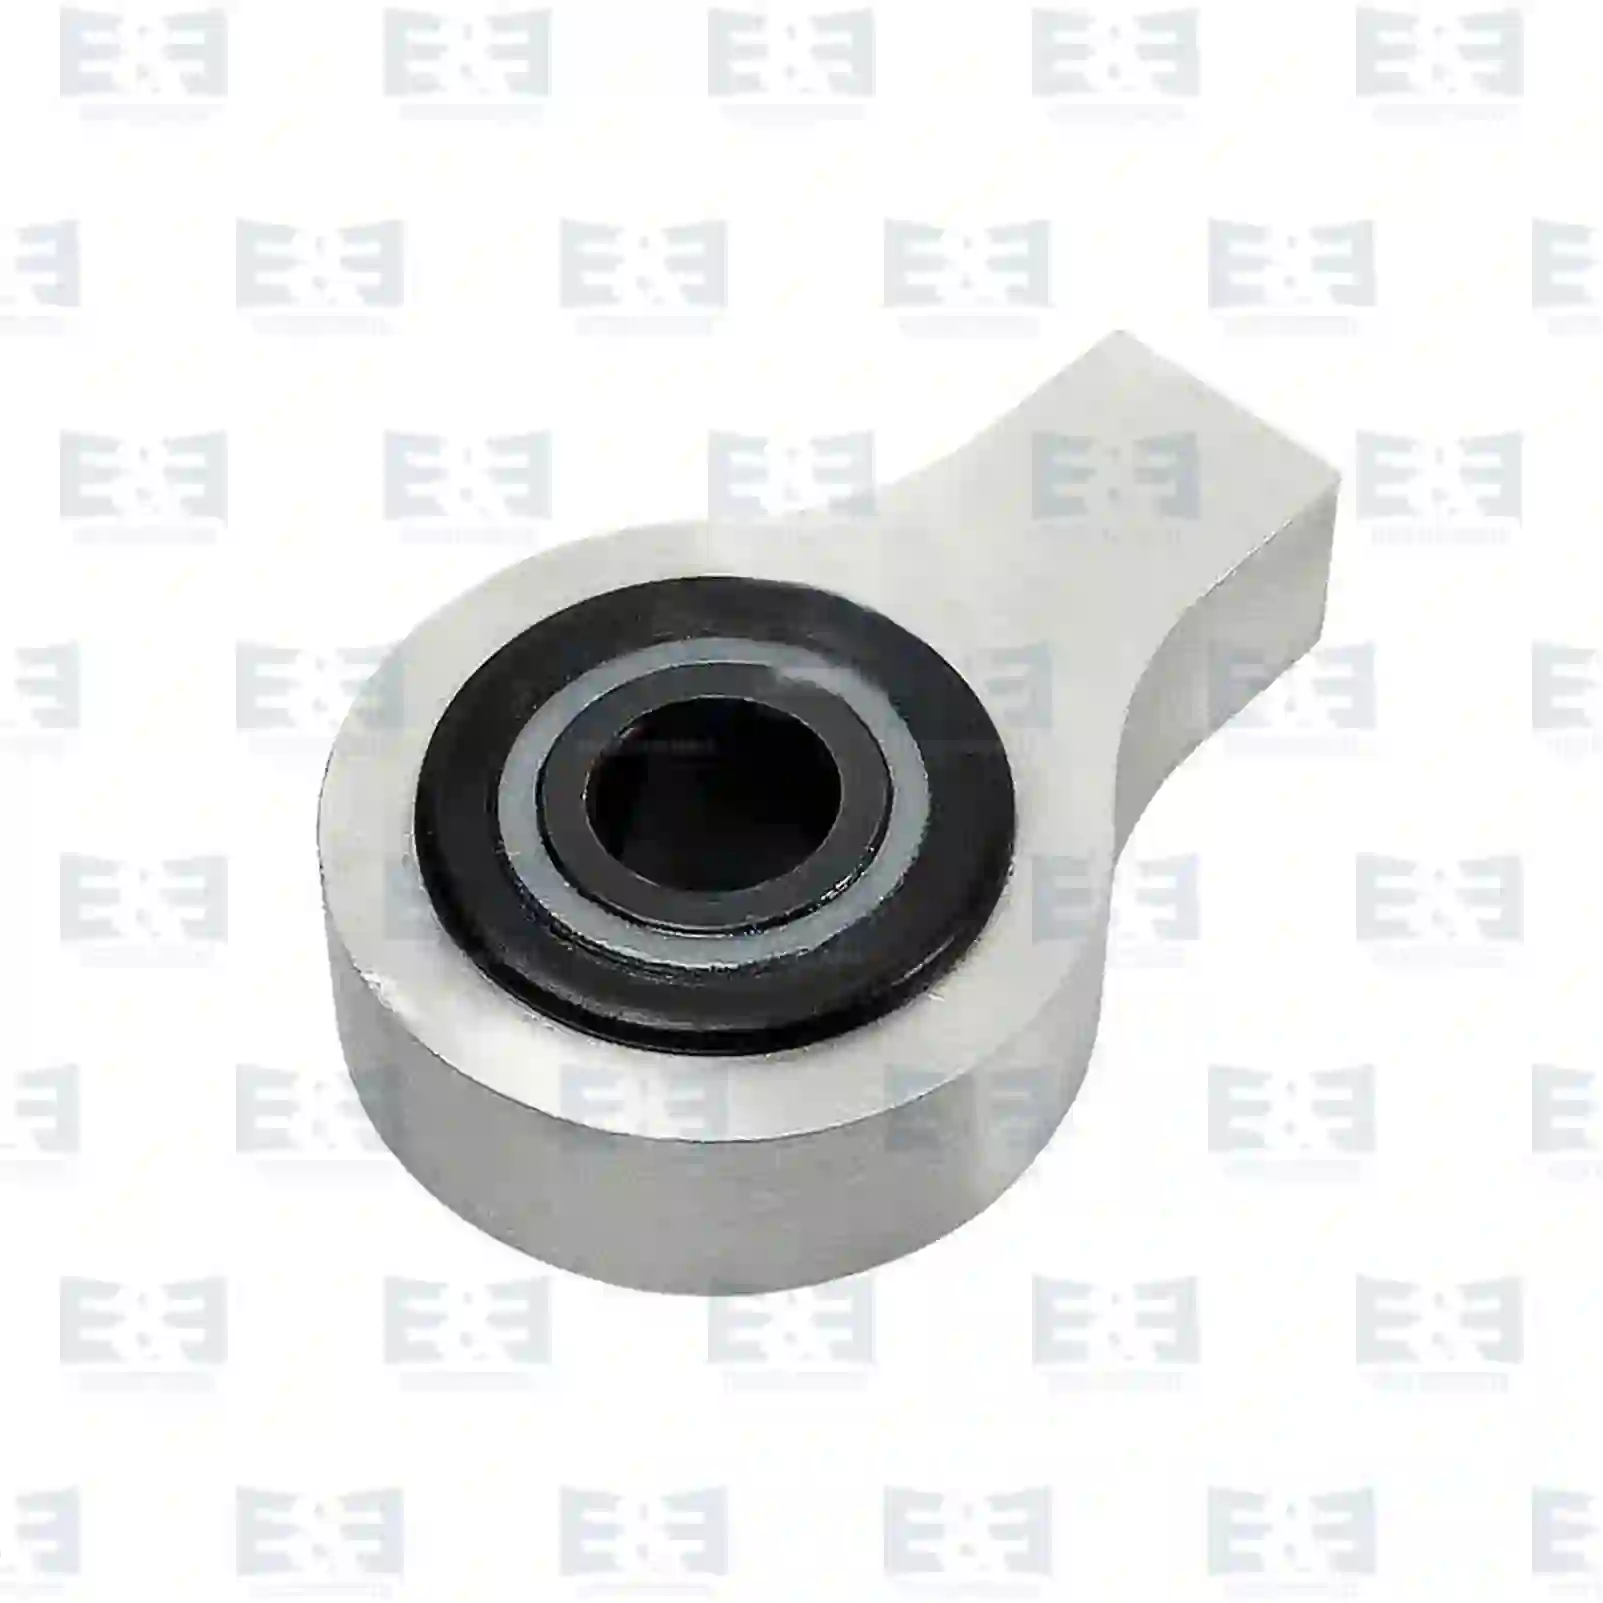 Bearing joint, cabin shock absorber, 2E2275134, 2109767, ZG40854-0008 ||  2E2275134 E&E Truck Spare Parts | Truck Spare Parts, Auotomotive Spare Parts Bearing joint, cabin shock absorber, 2E2275134, 2109767, ZG40854-0008 ||  2E2275134 E&E Truck Spare Parts | Truck Spare Parts, Auotomotive Spare Parts